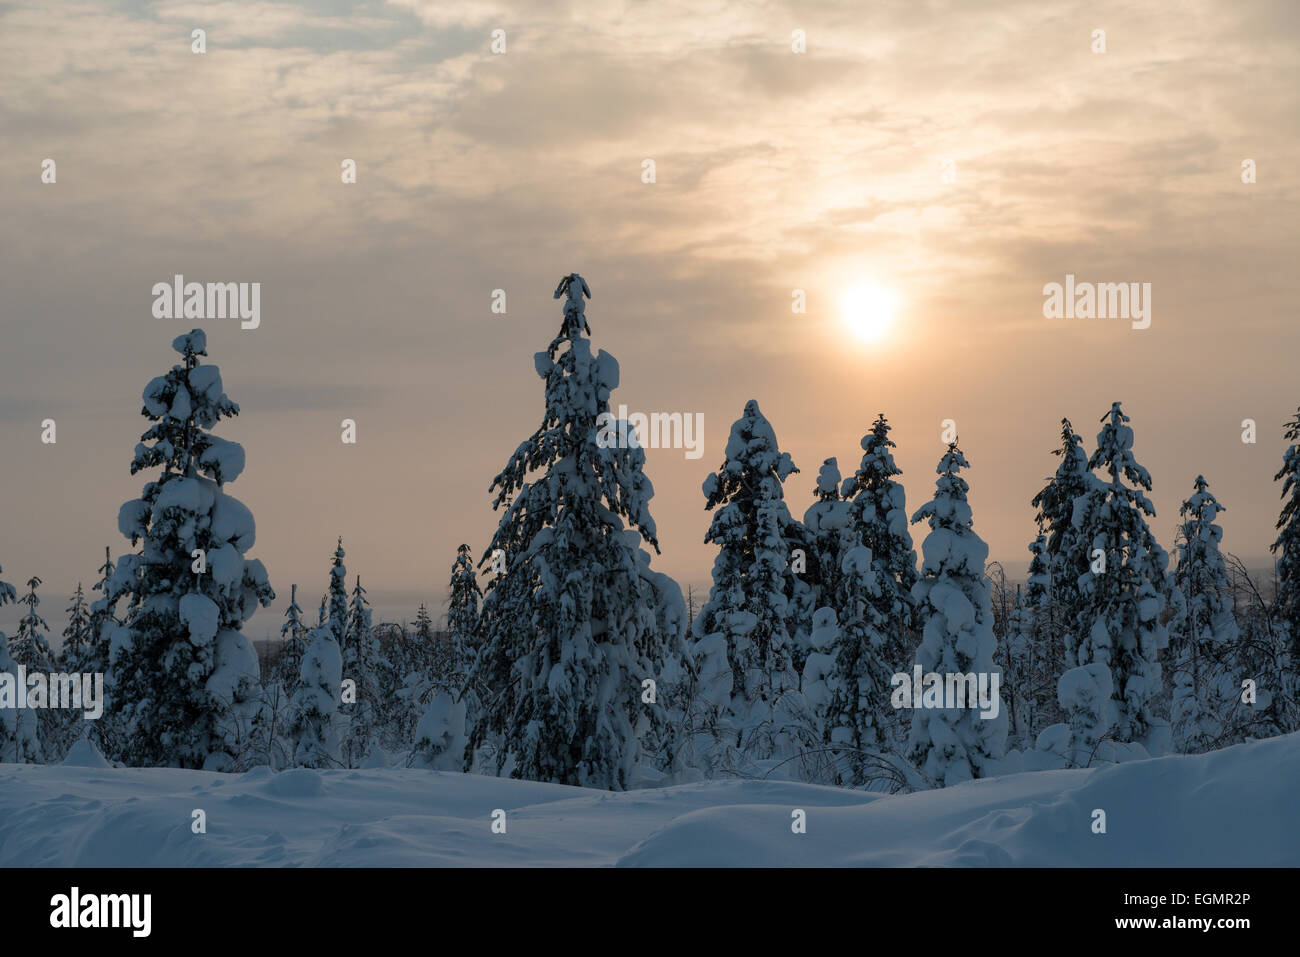 Snow-covered spruces, Fjell in winter, Riisitunturi National Park, Posio, Lapland, Finland Stock Photo